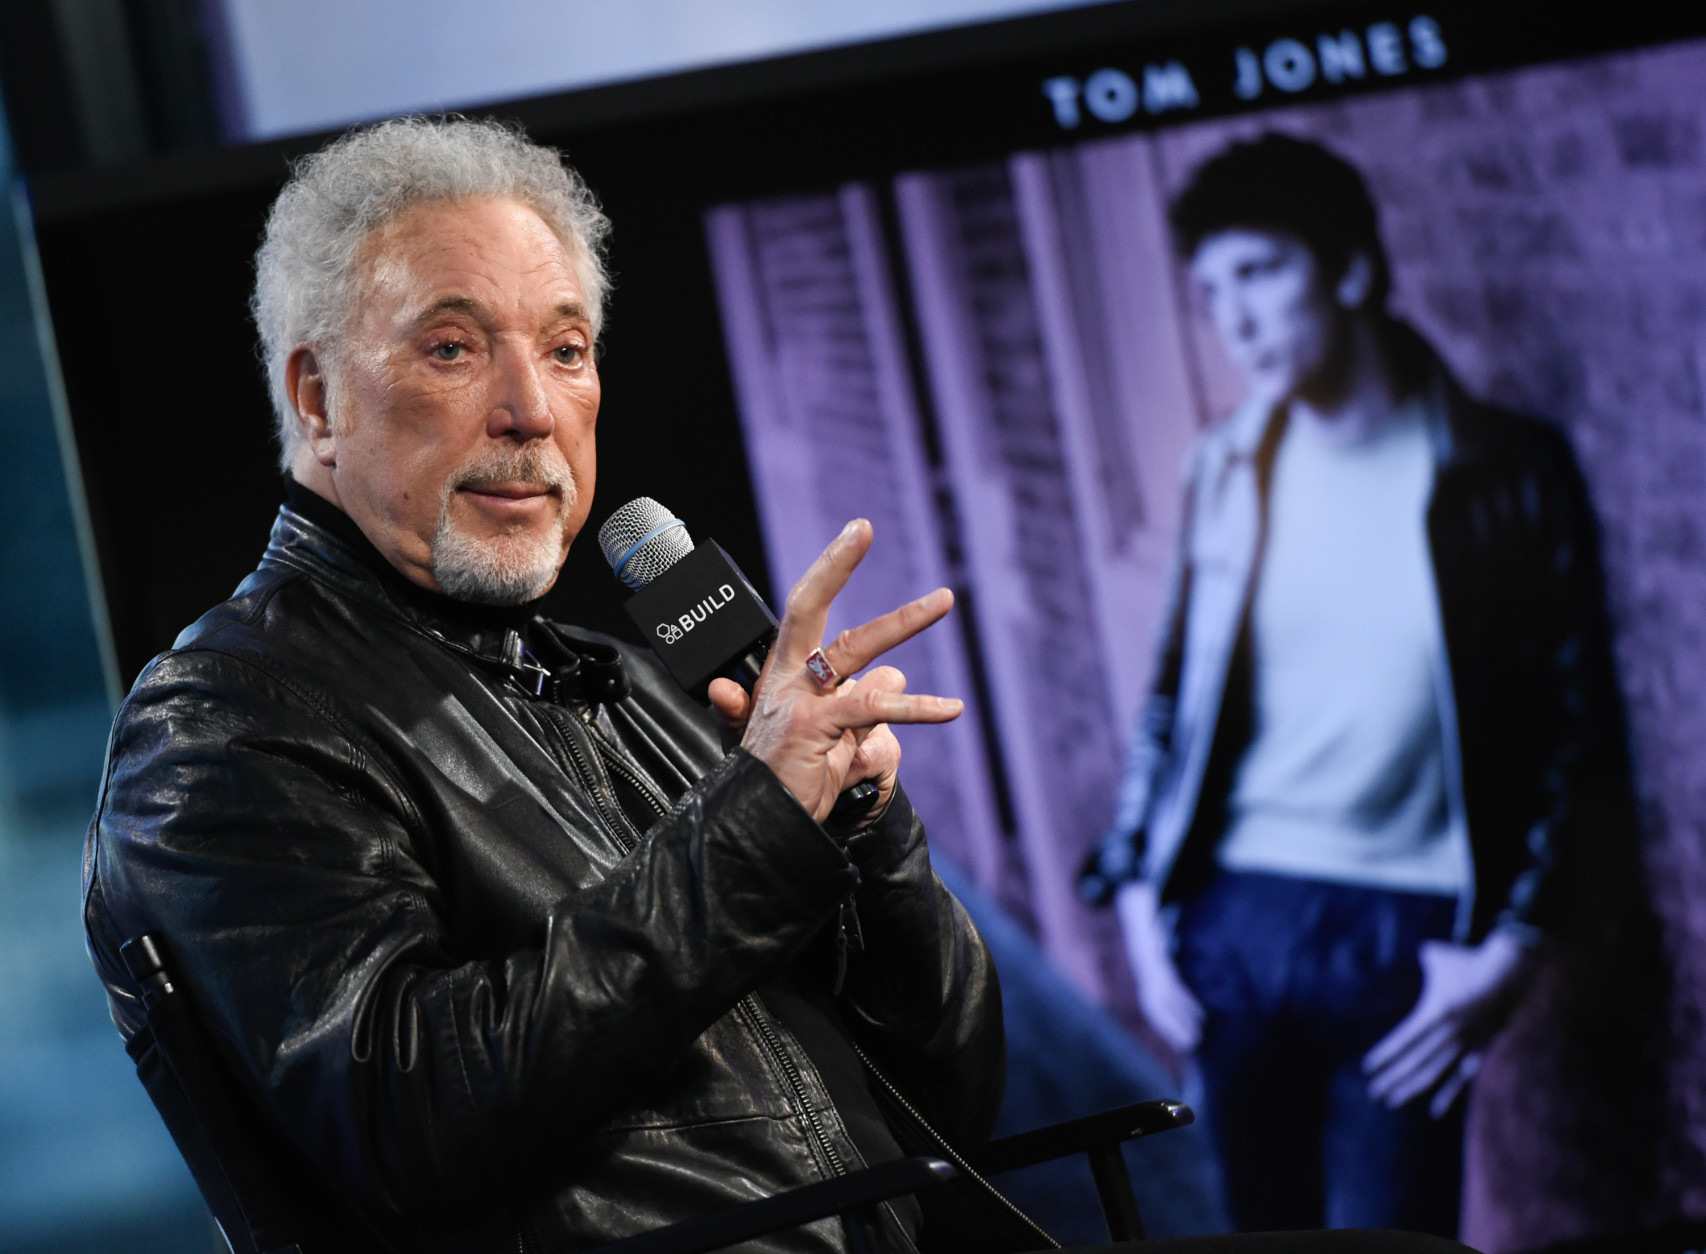 Singer Tom Jones participates in AOL's BUILD Speaker Series to discuss his new album, "Long Lost Suitcase", at AOL Studios on Wednesday, Dec. 16, 2015, in New York. (Photo by Evan Agostini/Invision/AP)